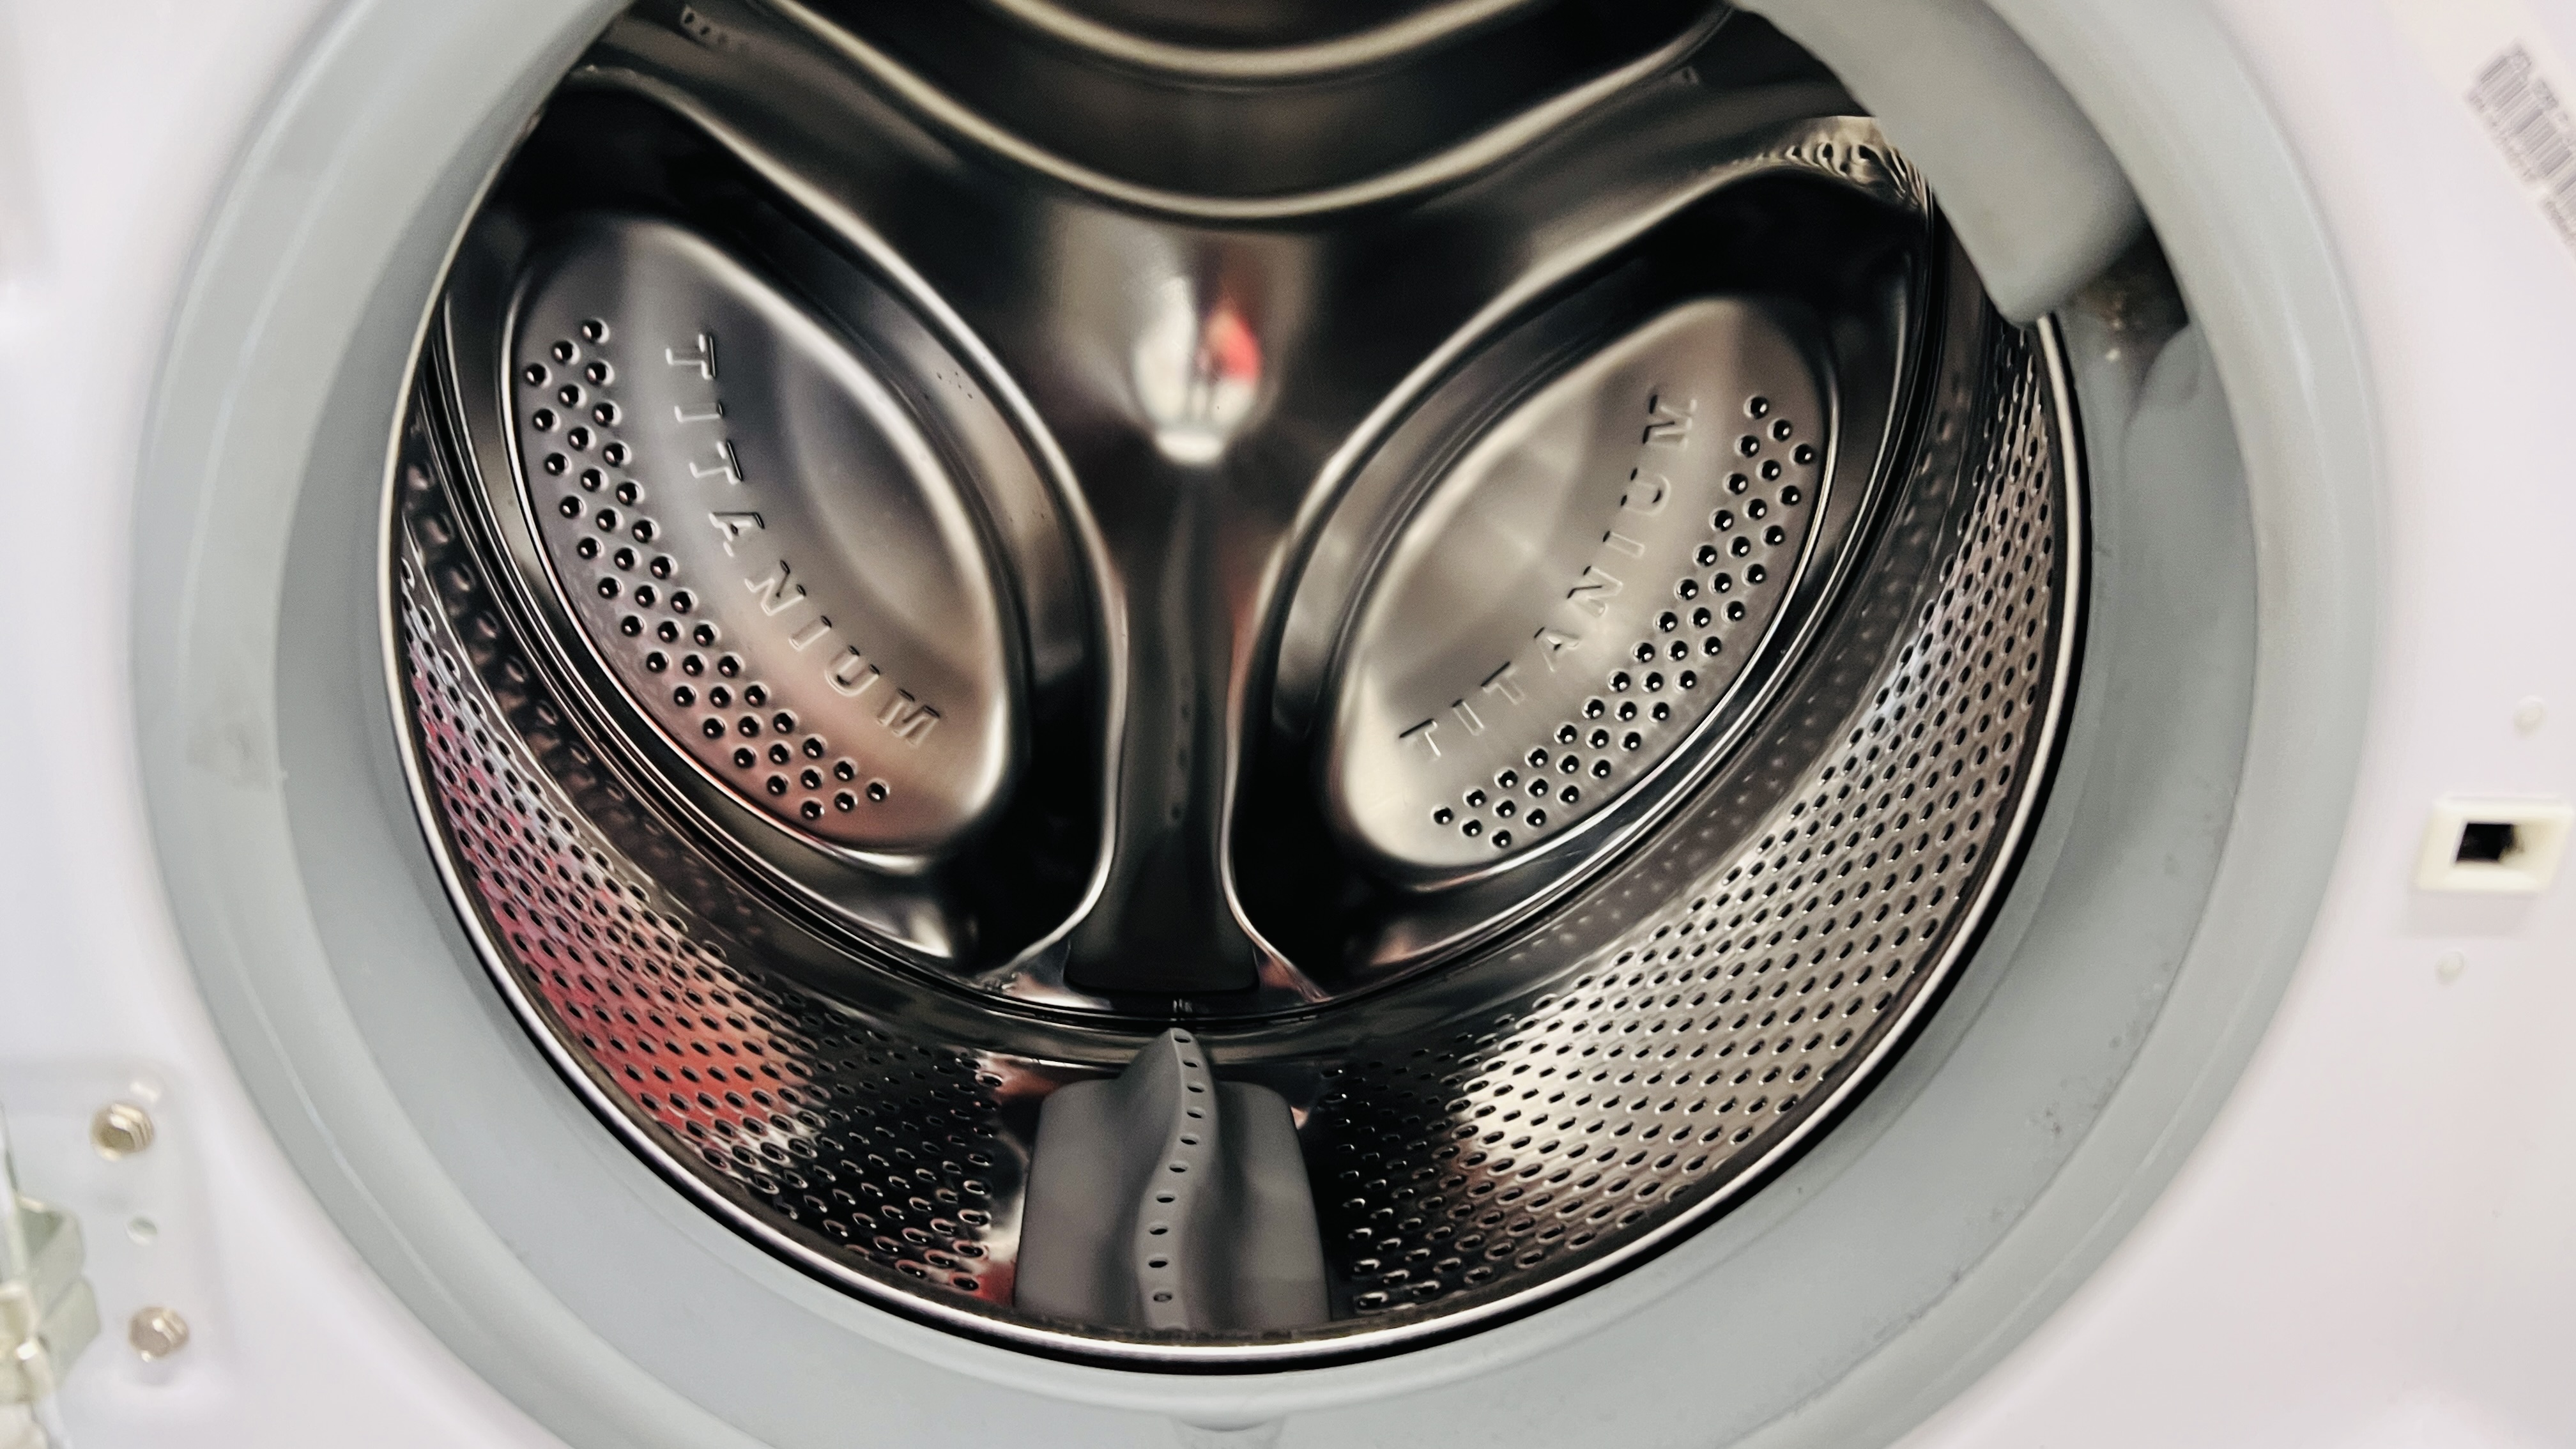 A HOTPOINT AQUARIUS 7KG WASHING MACHINE - SOLD AS SEEN. - Image 5 of 6